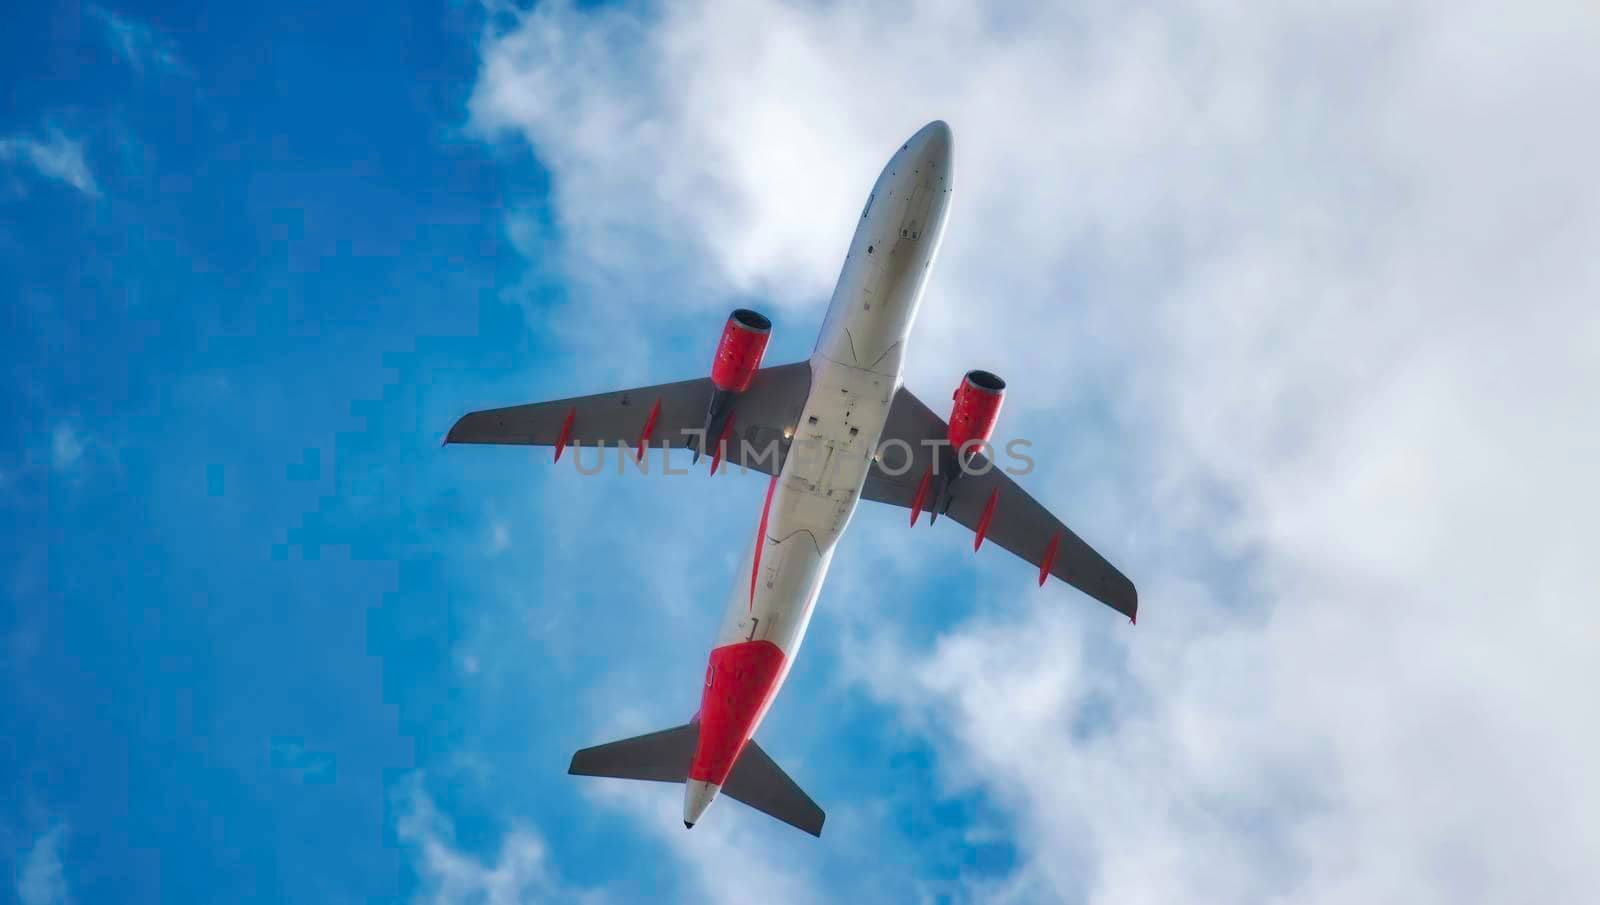 Underbelly of a jet airplane flying in the air isolated against a blue sky with clouds